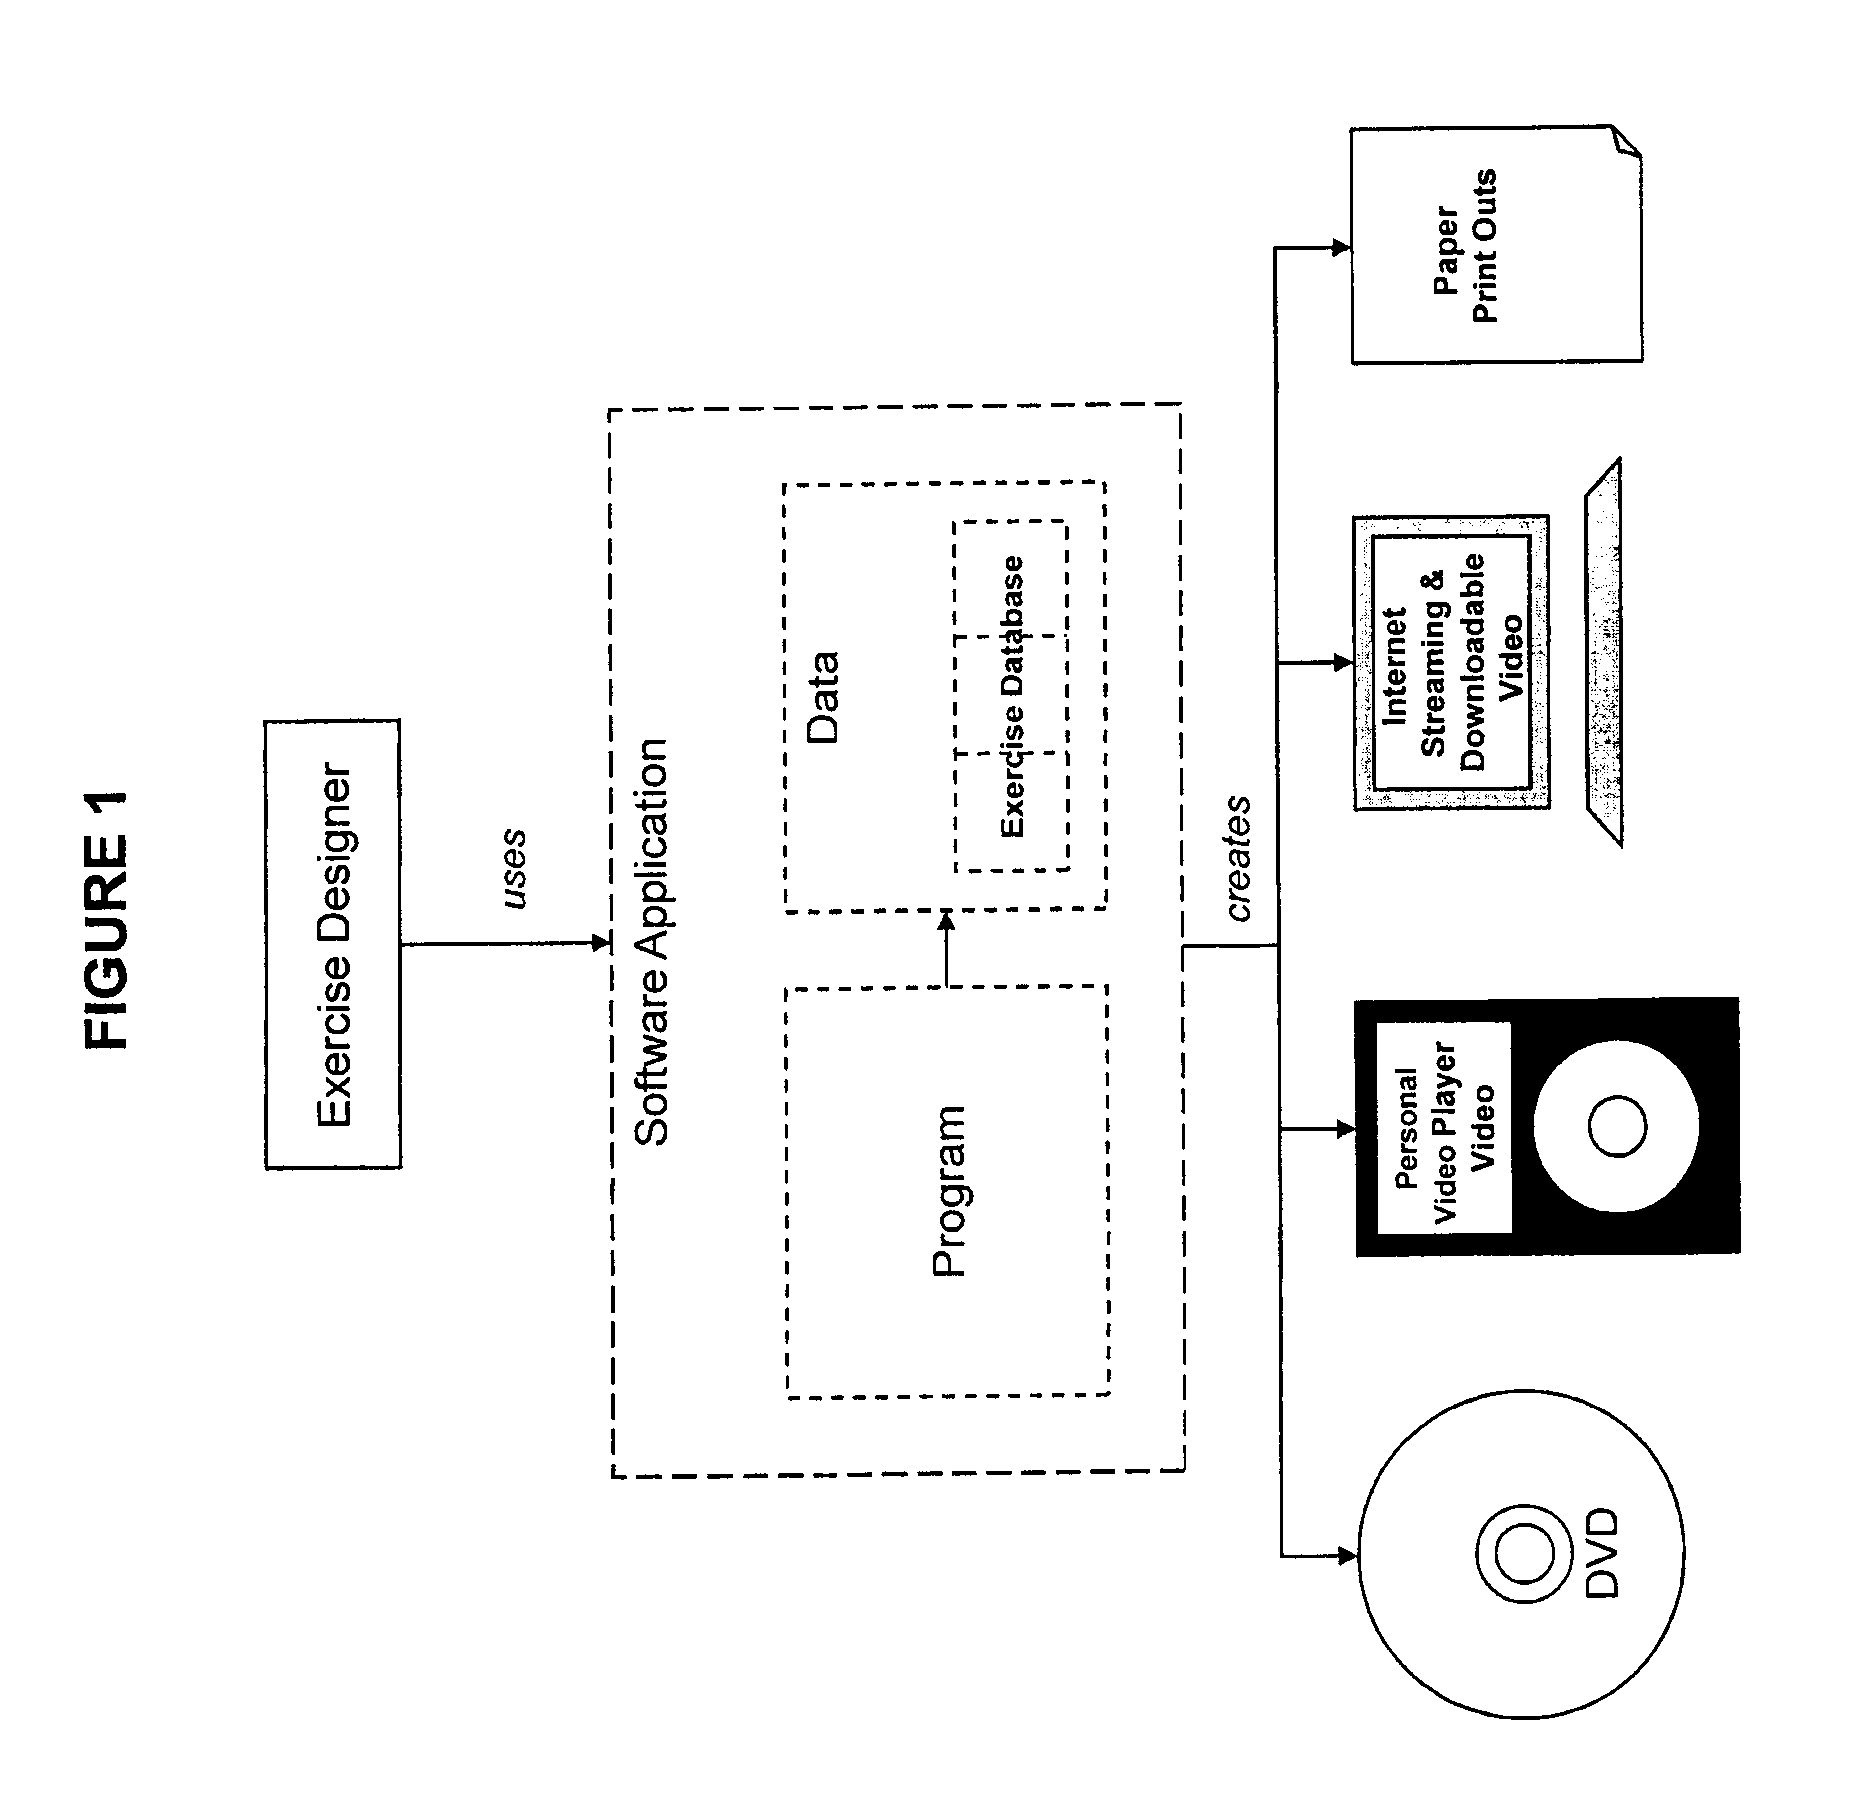 Method of Developing and Creating a Personalized Exercise Regime in a Digital Medium